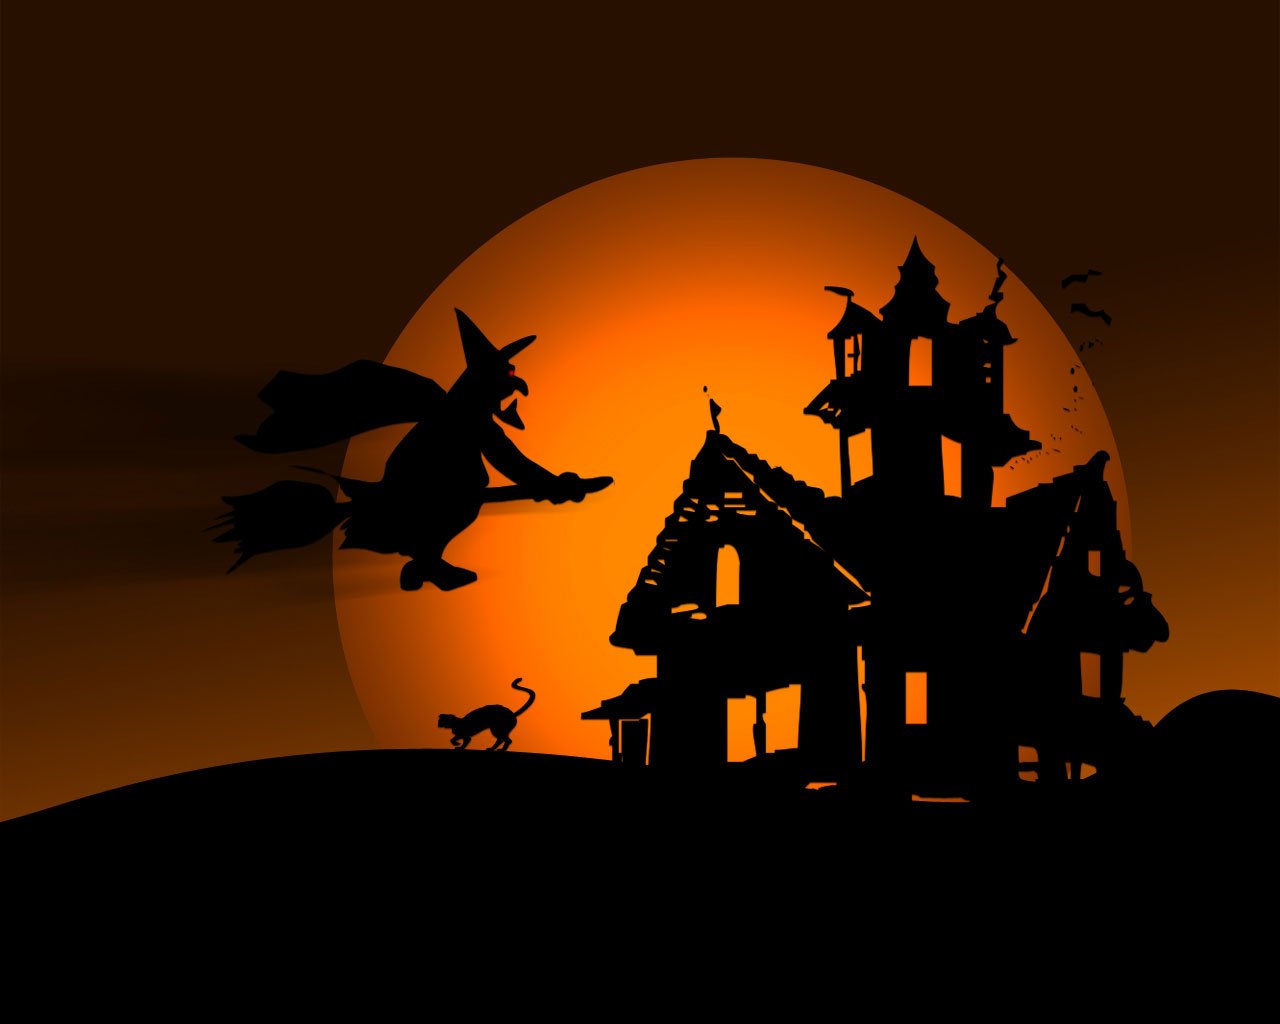 Scary Happy Halloween 2015 Images Backgrounds Wallpapers HD Wallpapers Download Free Images Wallpaper [wallpaper981.blogspot.com]